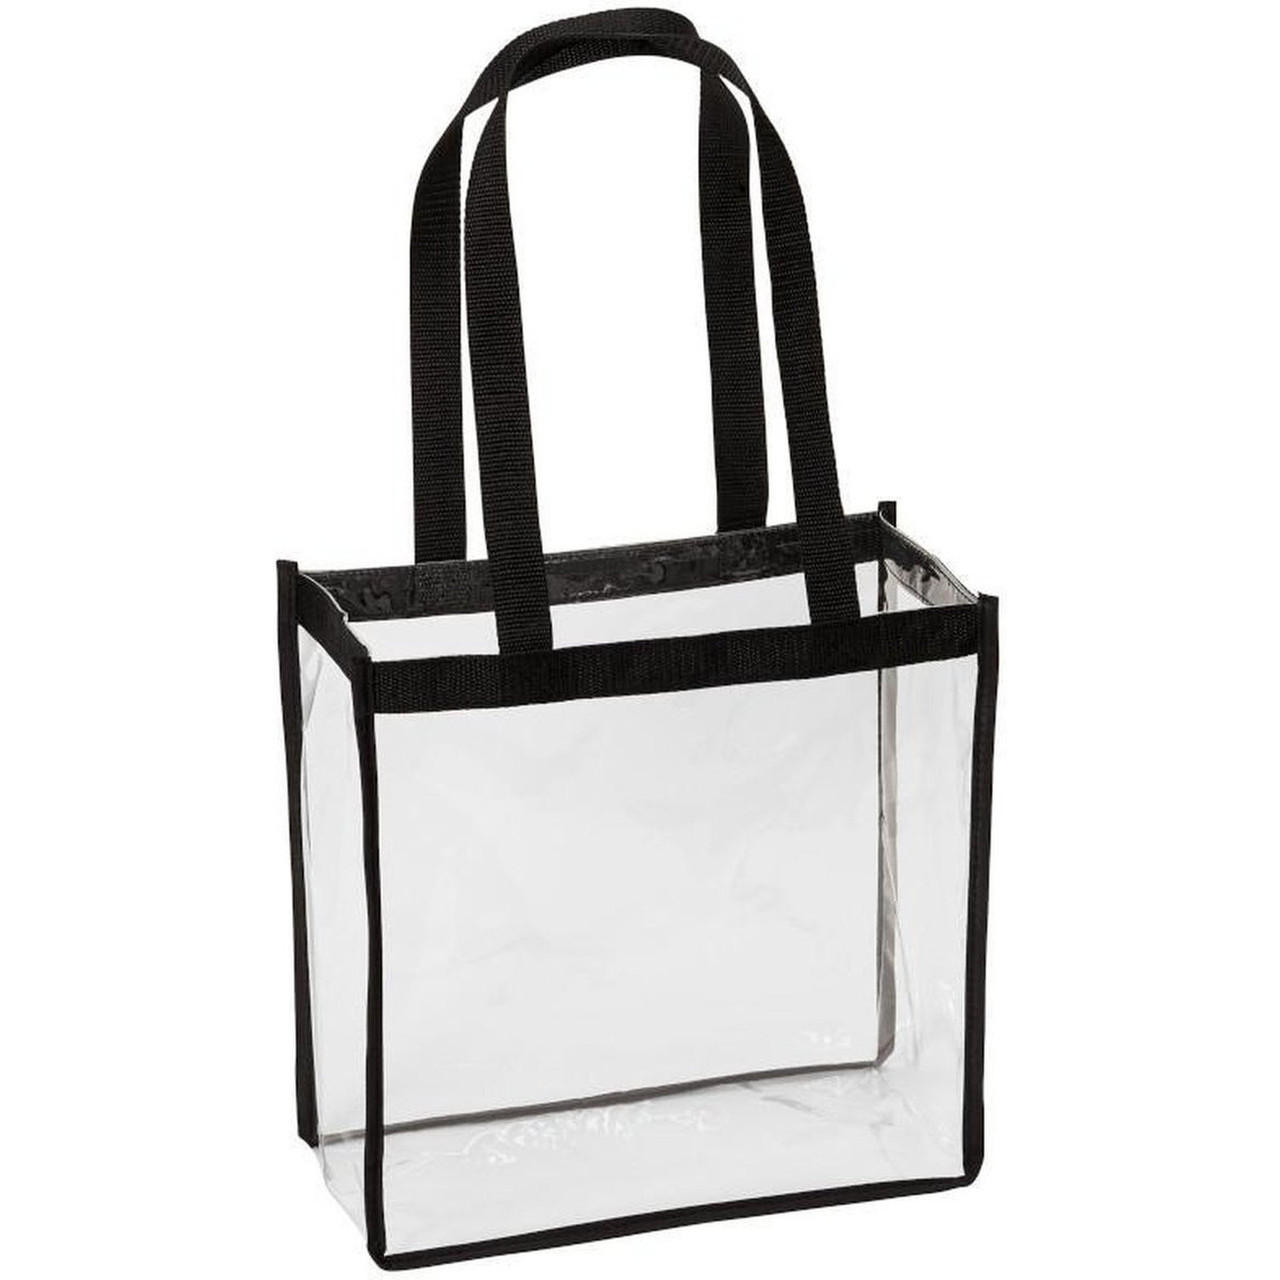 Clear Stadium Approved Tote Bag